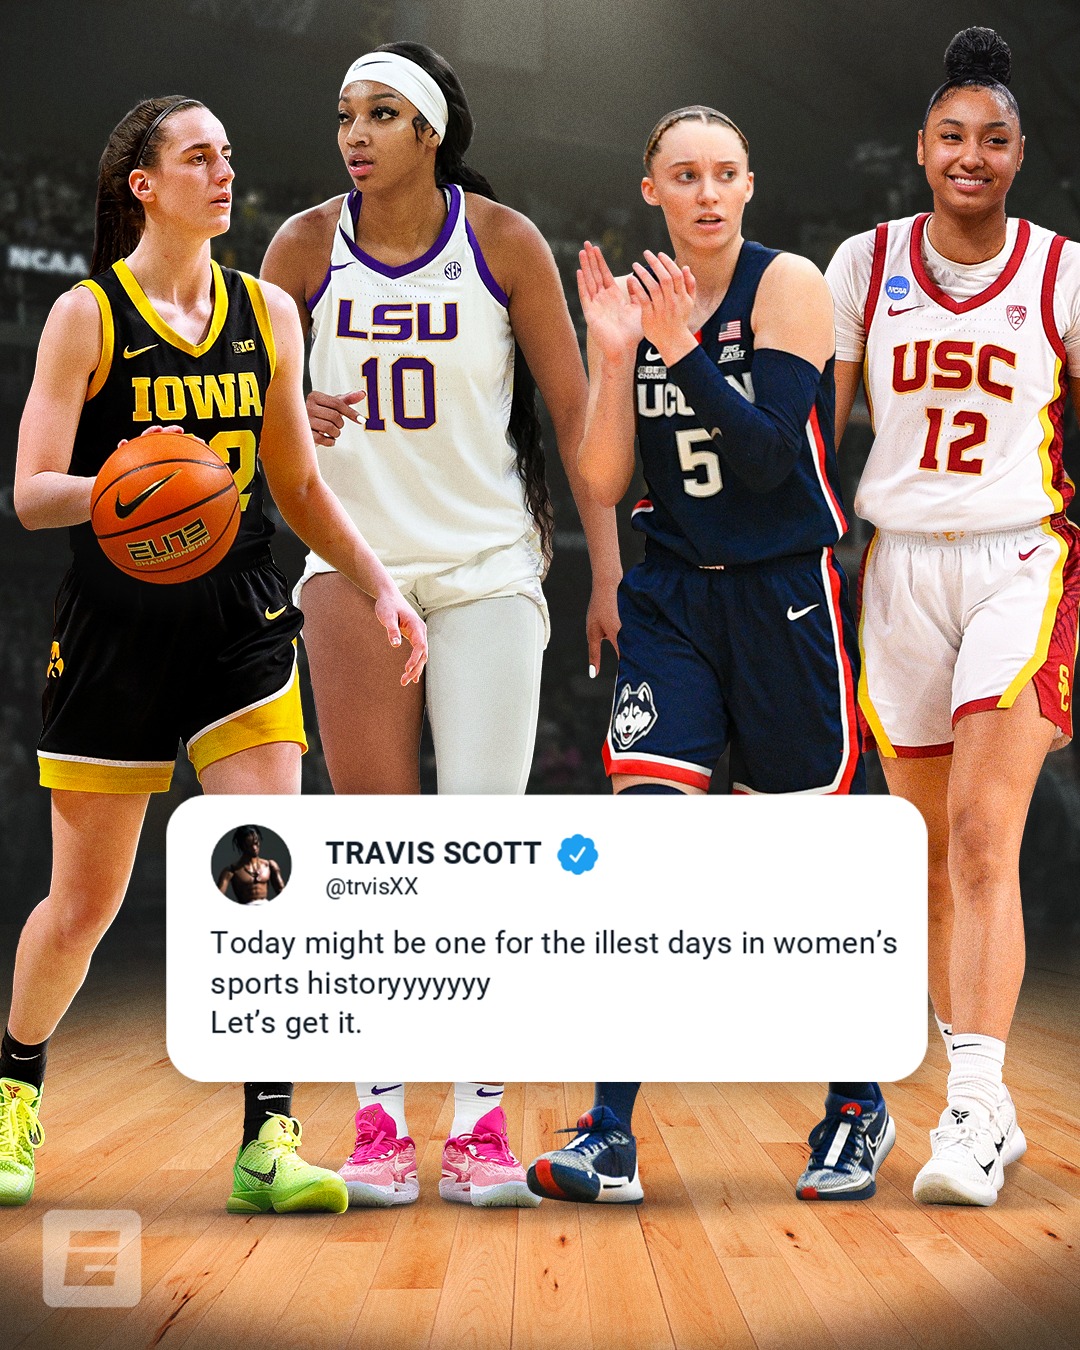 The Best of the Best In Women’s Basketball Tonight!